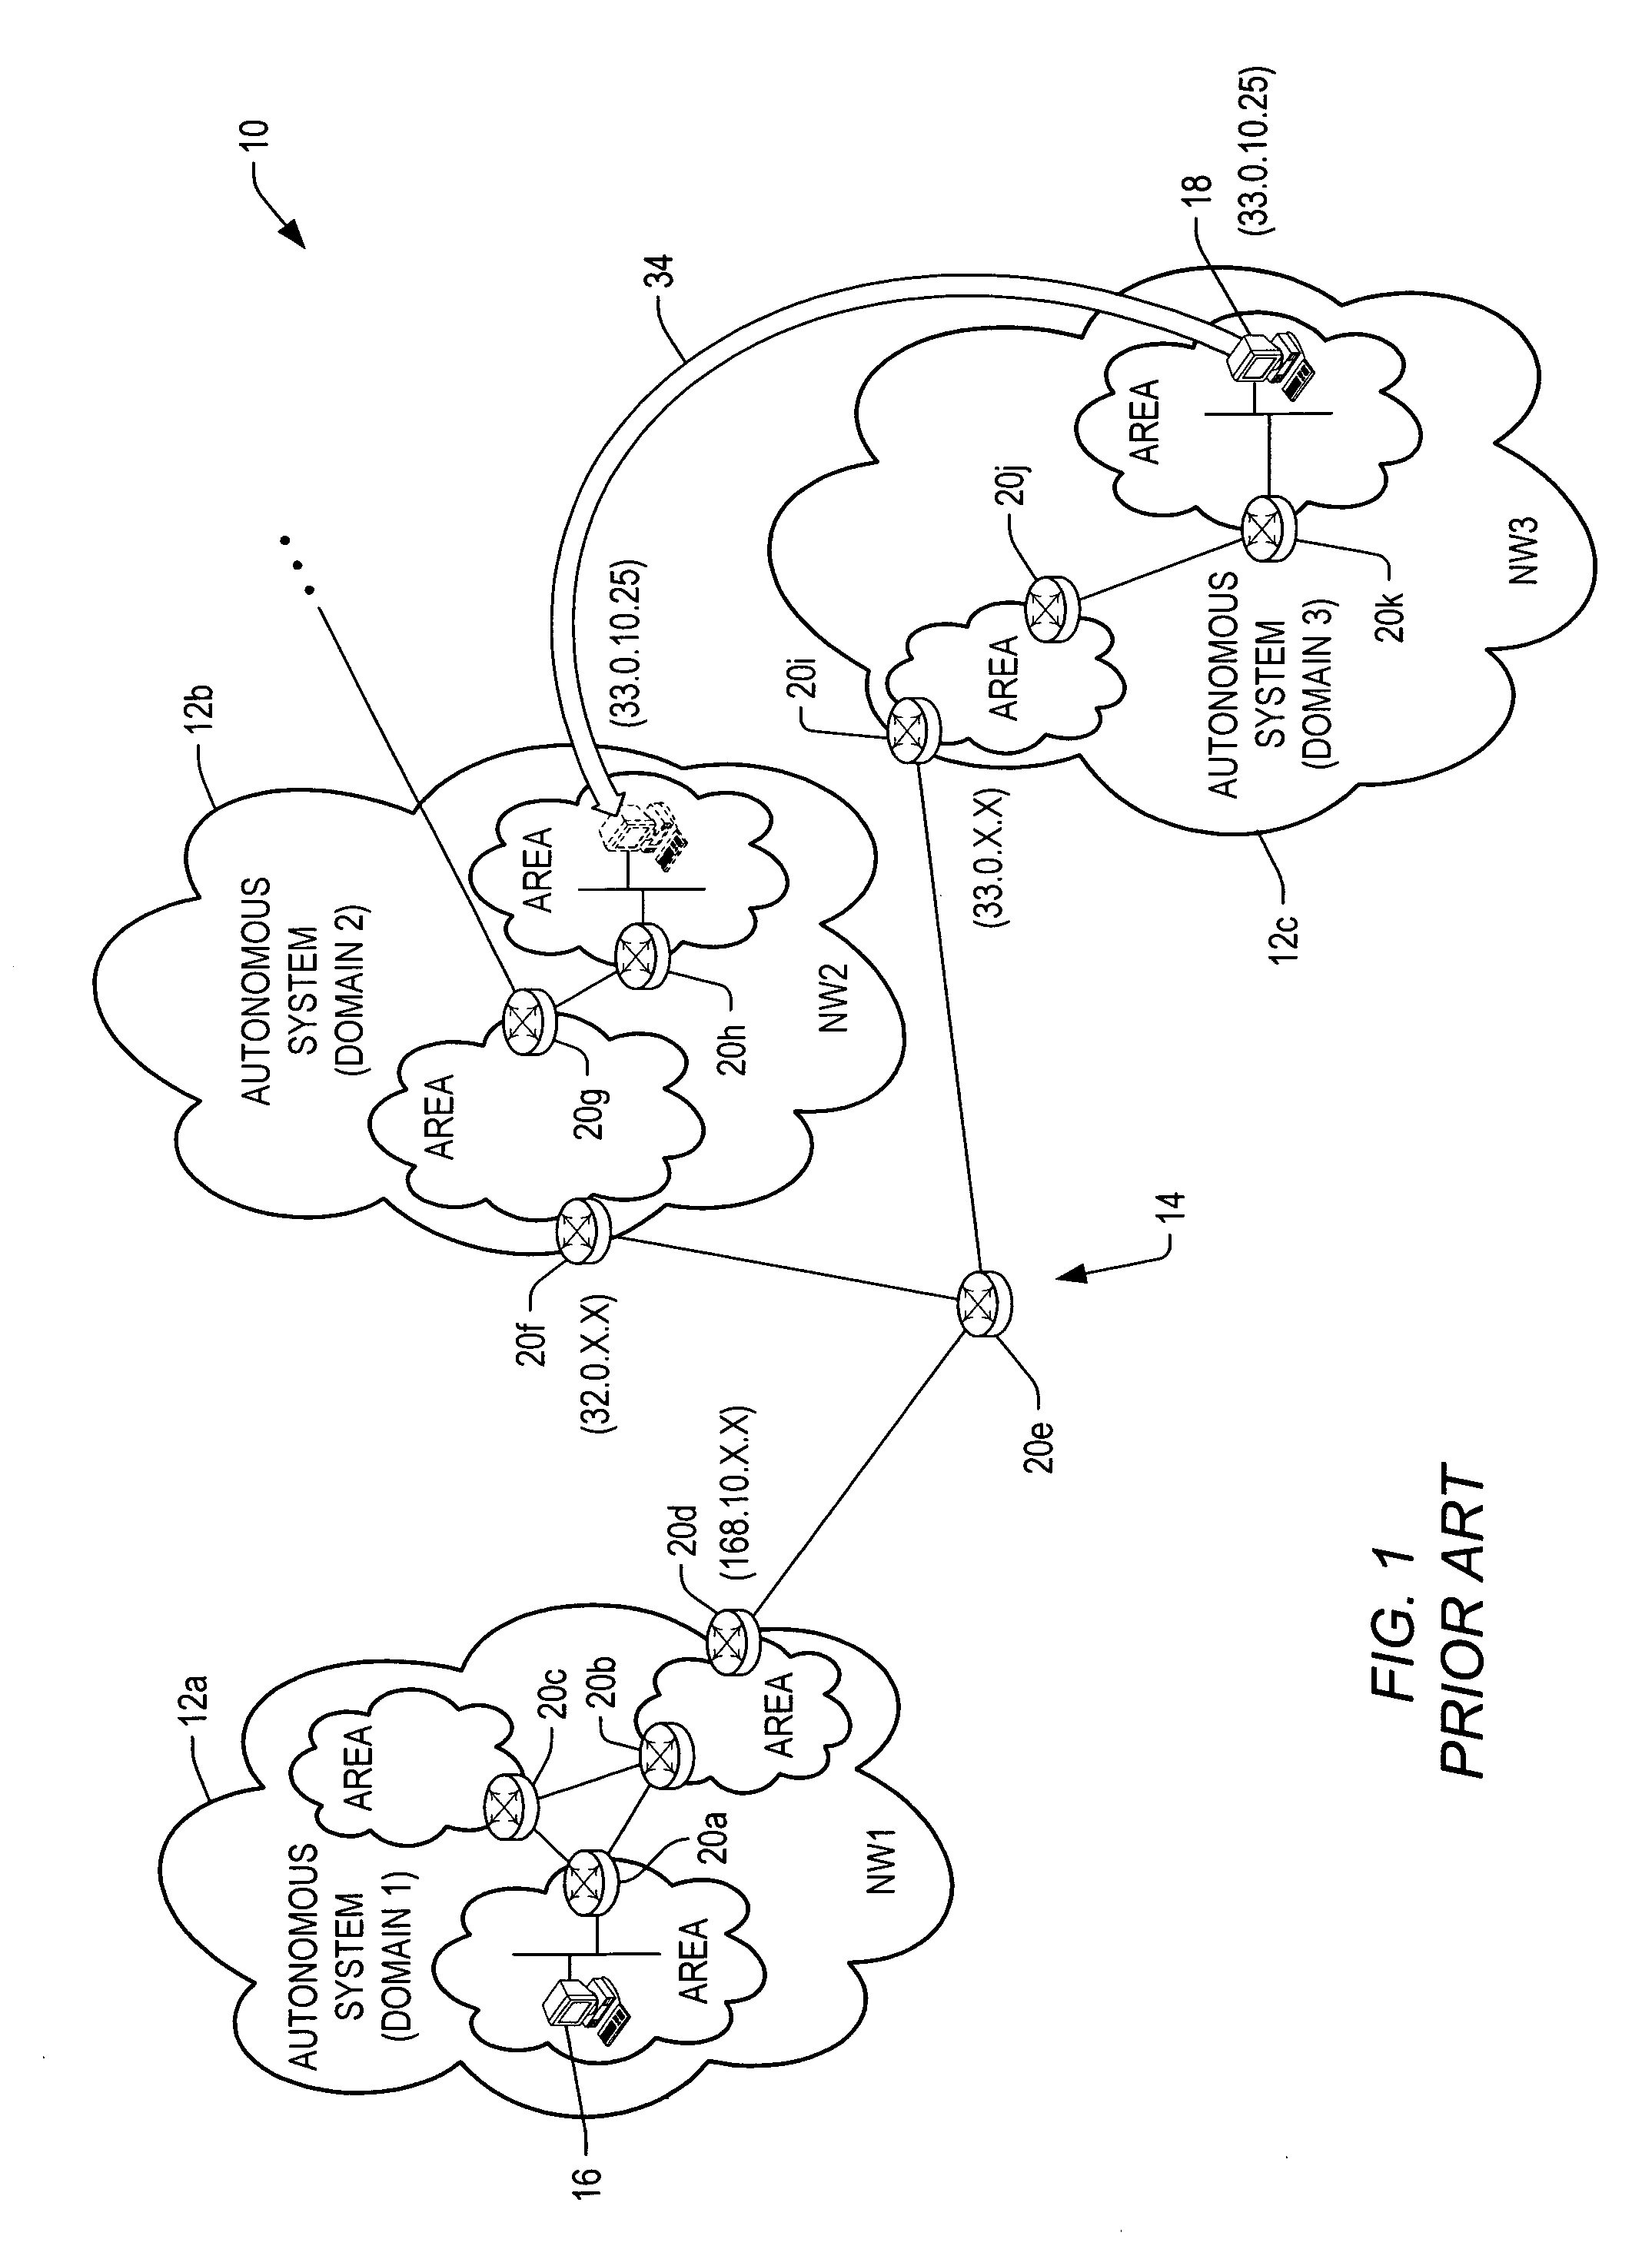 Apparatus, system, and method for routing data to and from a host that is moved from one location on a communication system to another location on the communication system